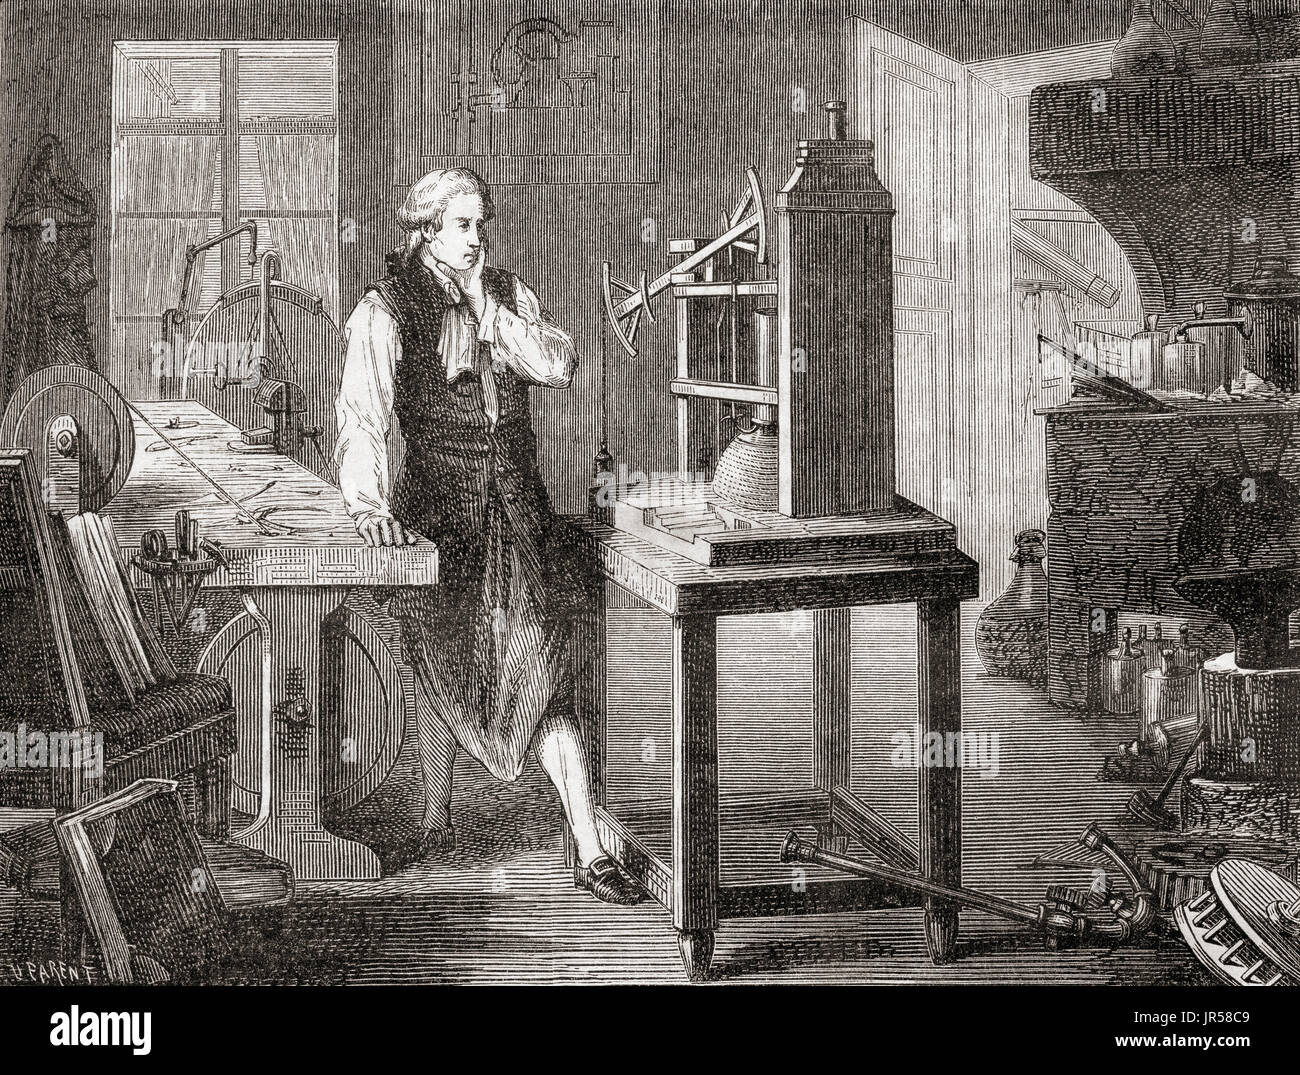 James Watt in his Glasgow workshop improving on Thomas Newcomen's 1712 Newcomen steam engine, with his Watt steam engine in 1781.  James Watt, 1736 -1819.  Scottish inventor, mechanical engineer and chemist.  From Les Merveilles de la Science, published 1870. Stock Photo